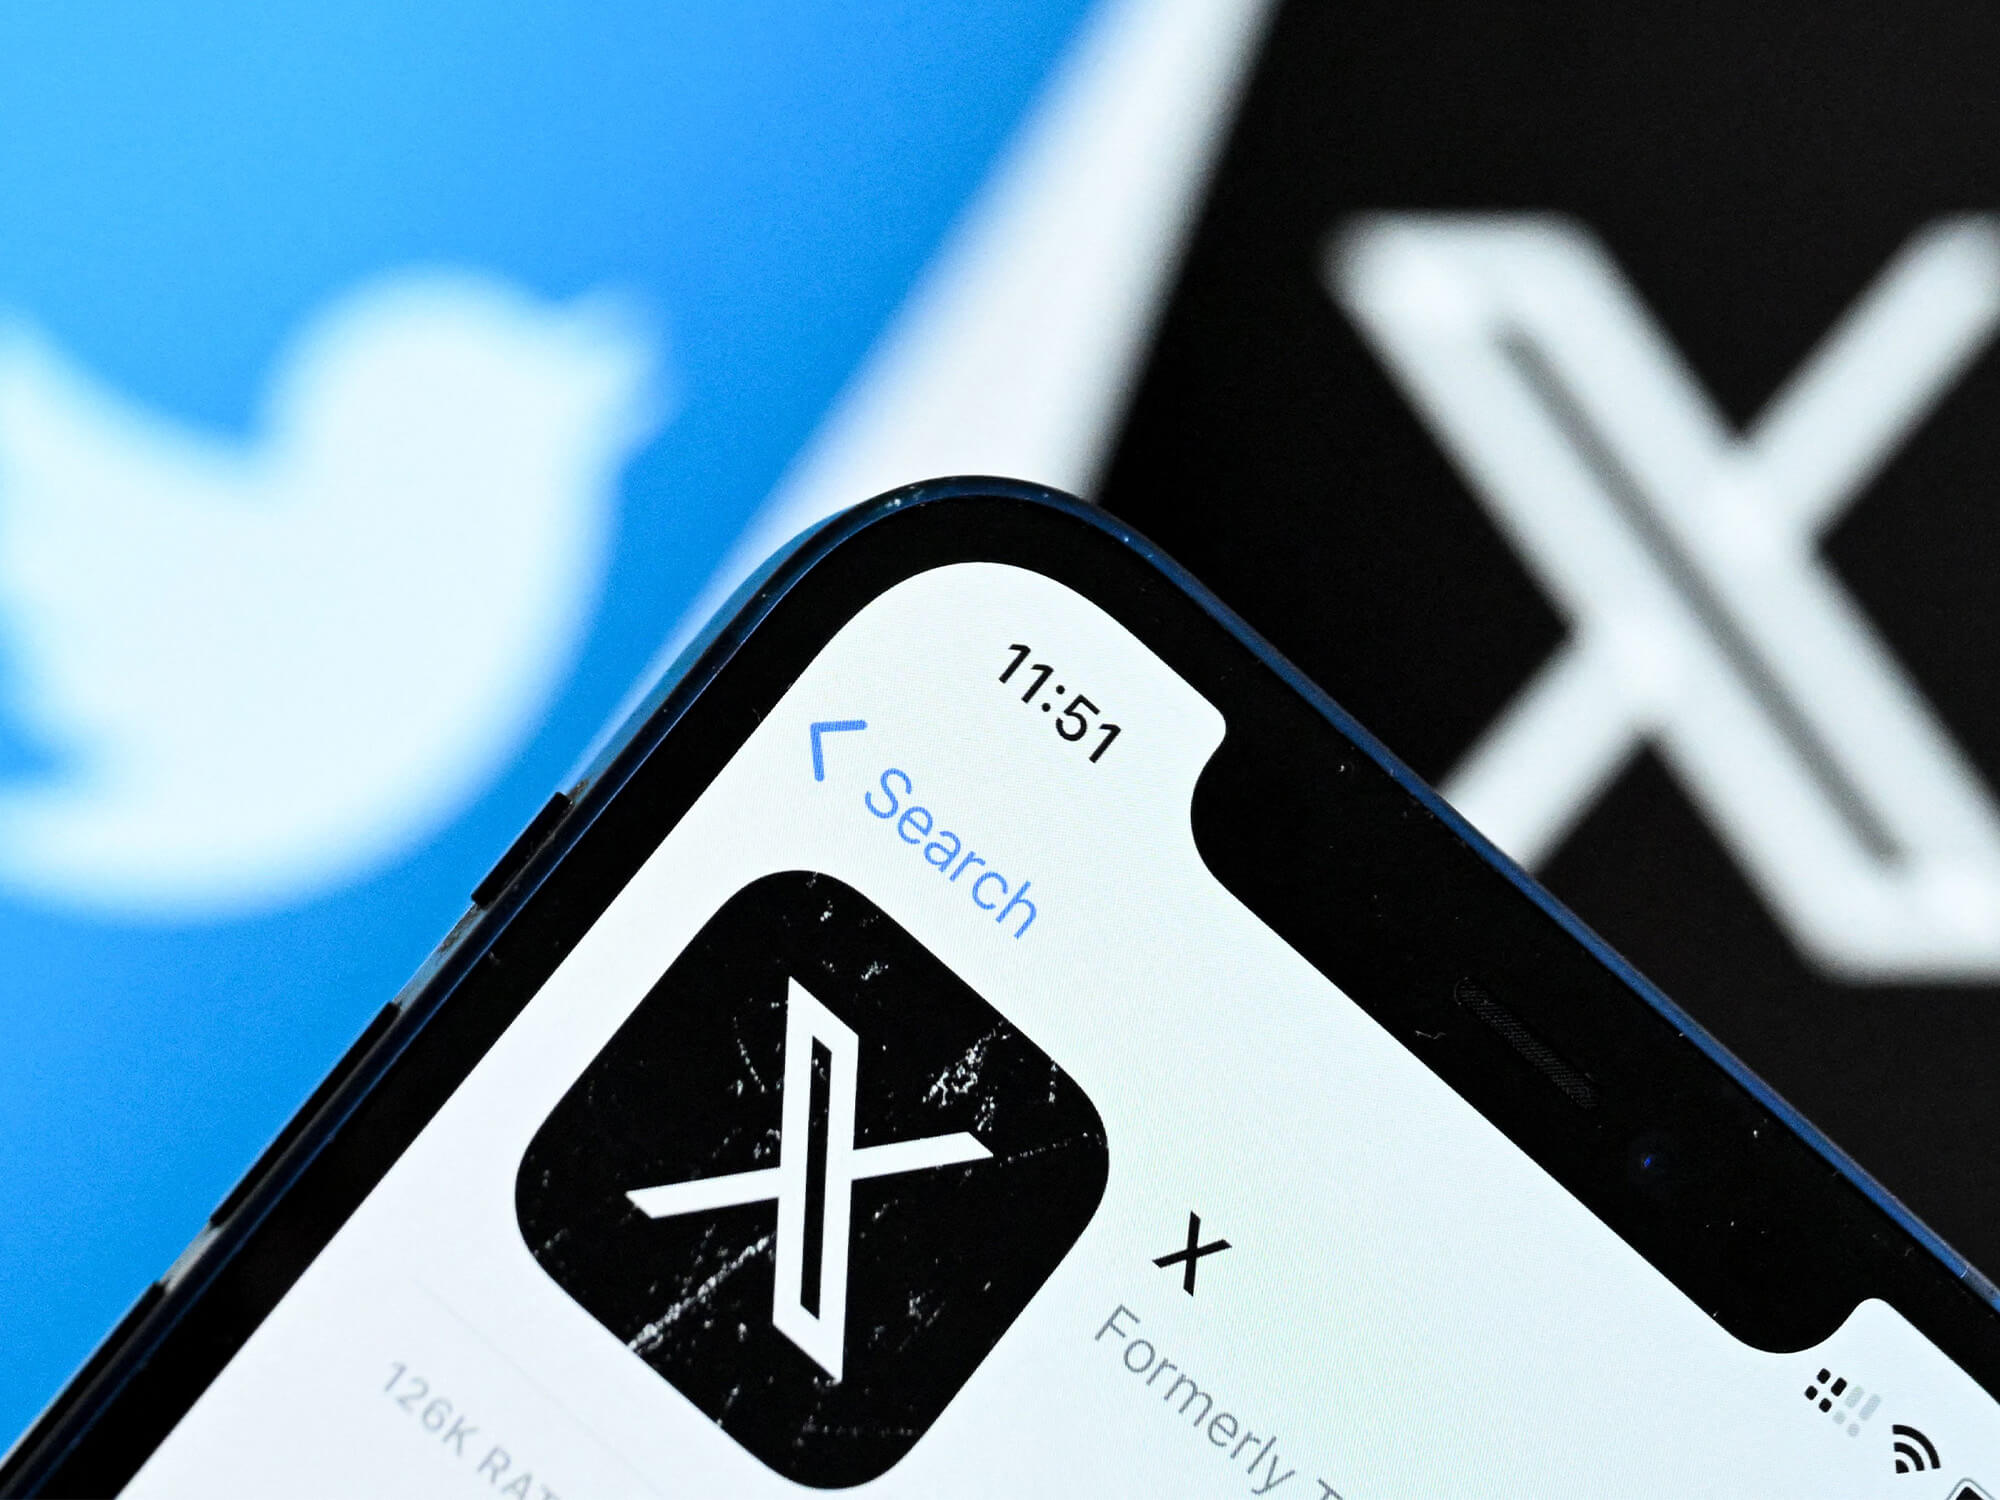 A phone showing ther X logo. Both the Twitter / X logos are blurred in the background.